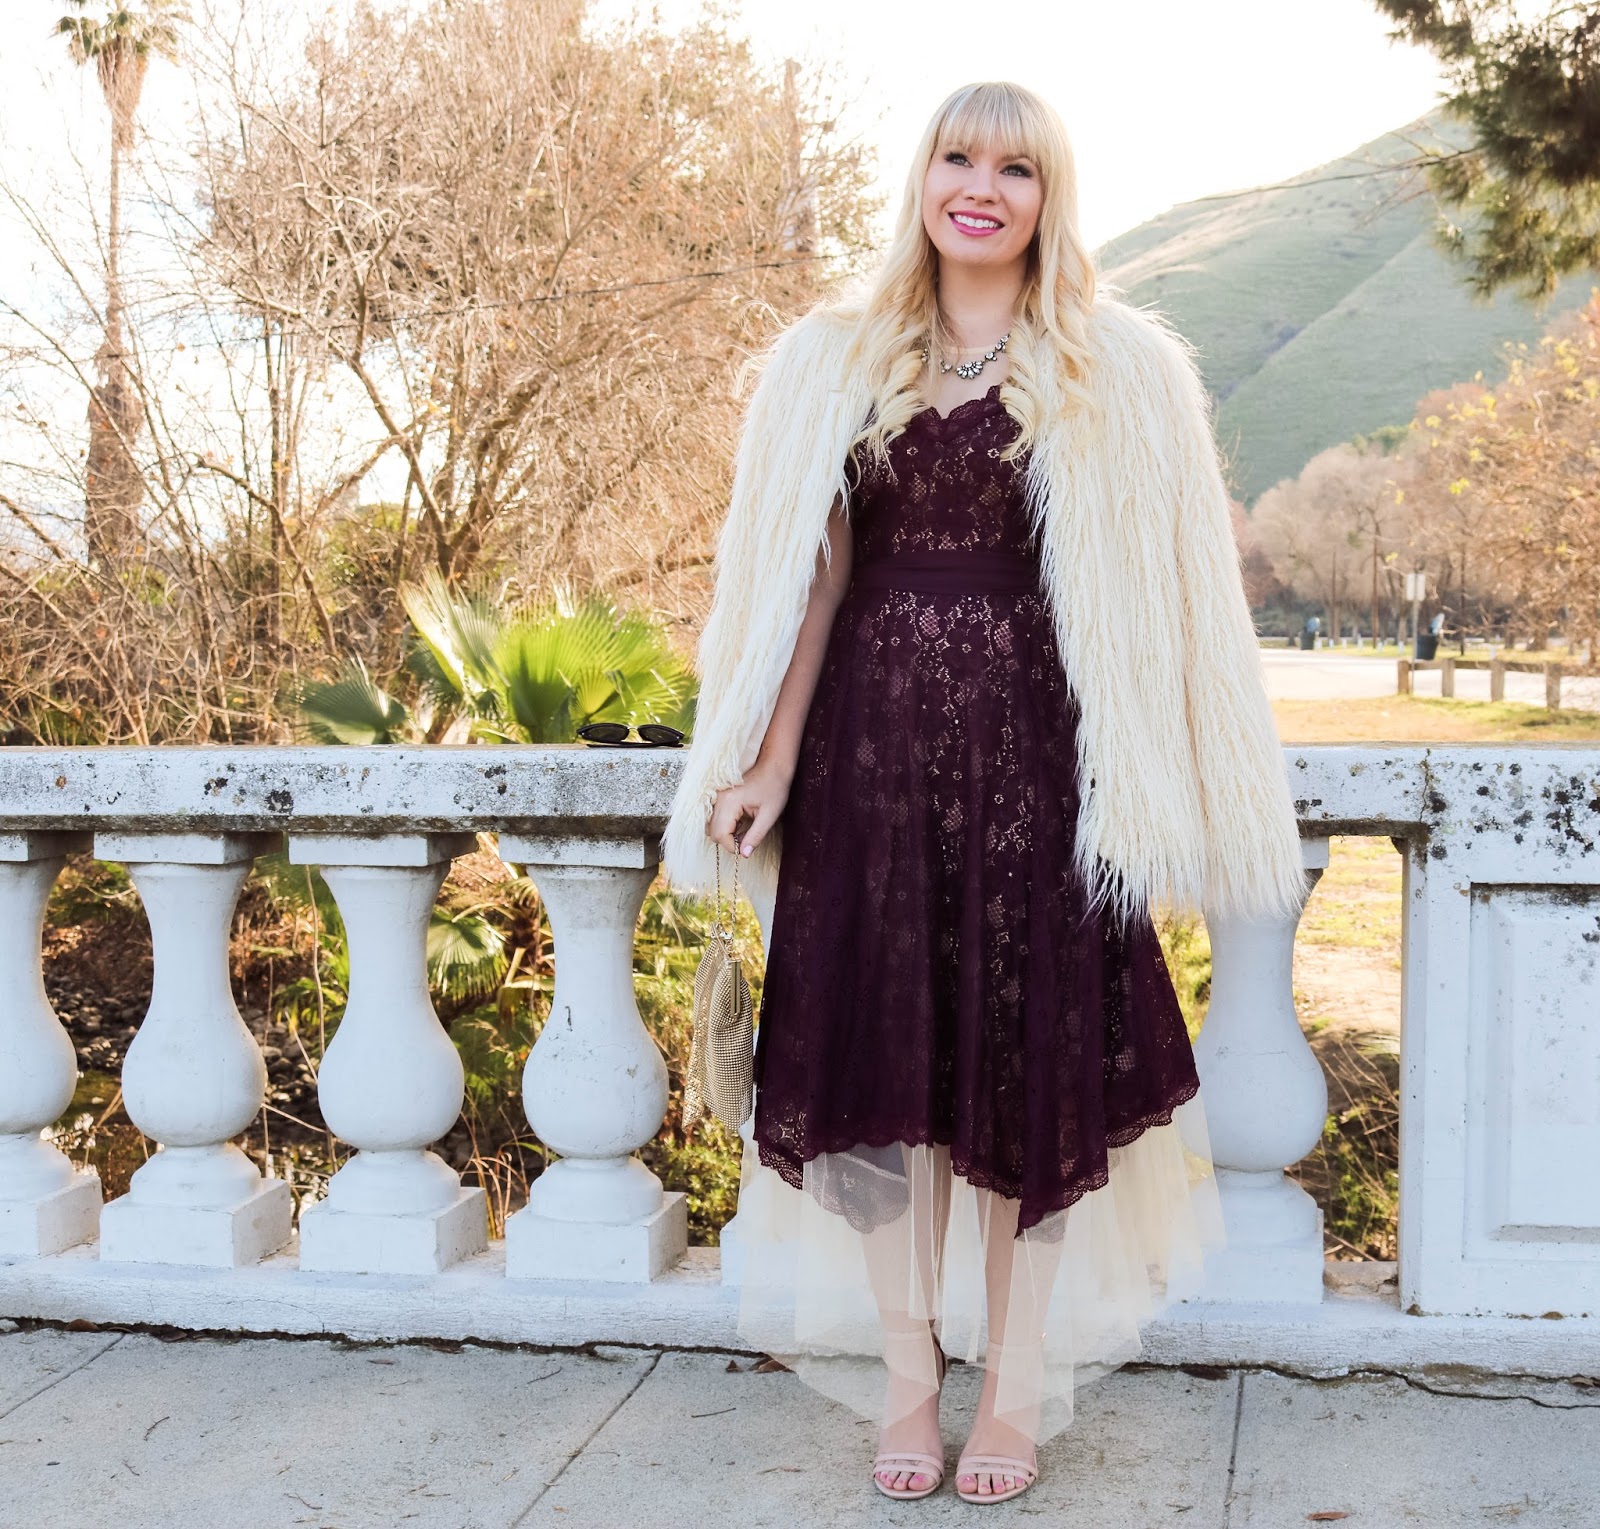 New Year's Eve Outfit: Lace Dress & Faux Fur Coat